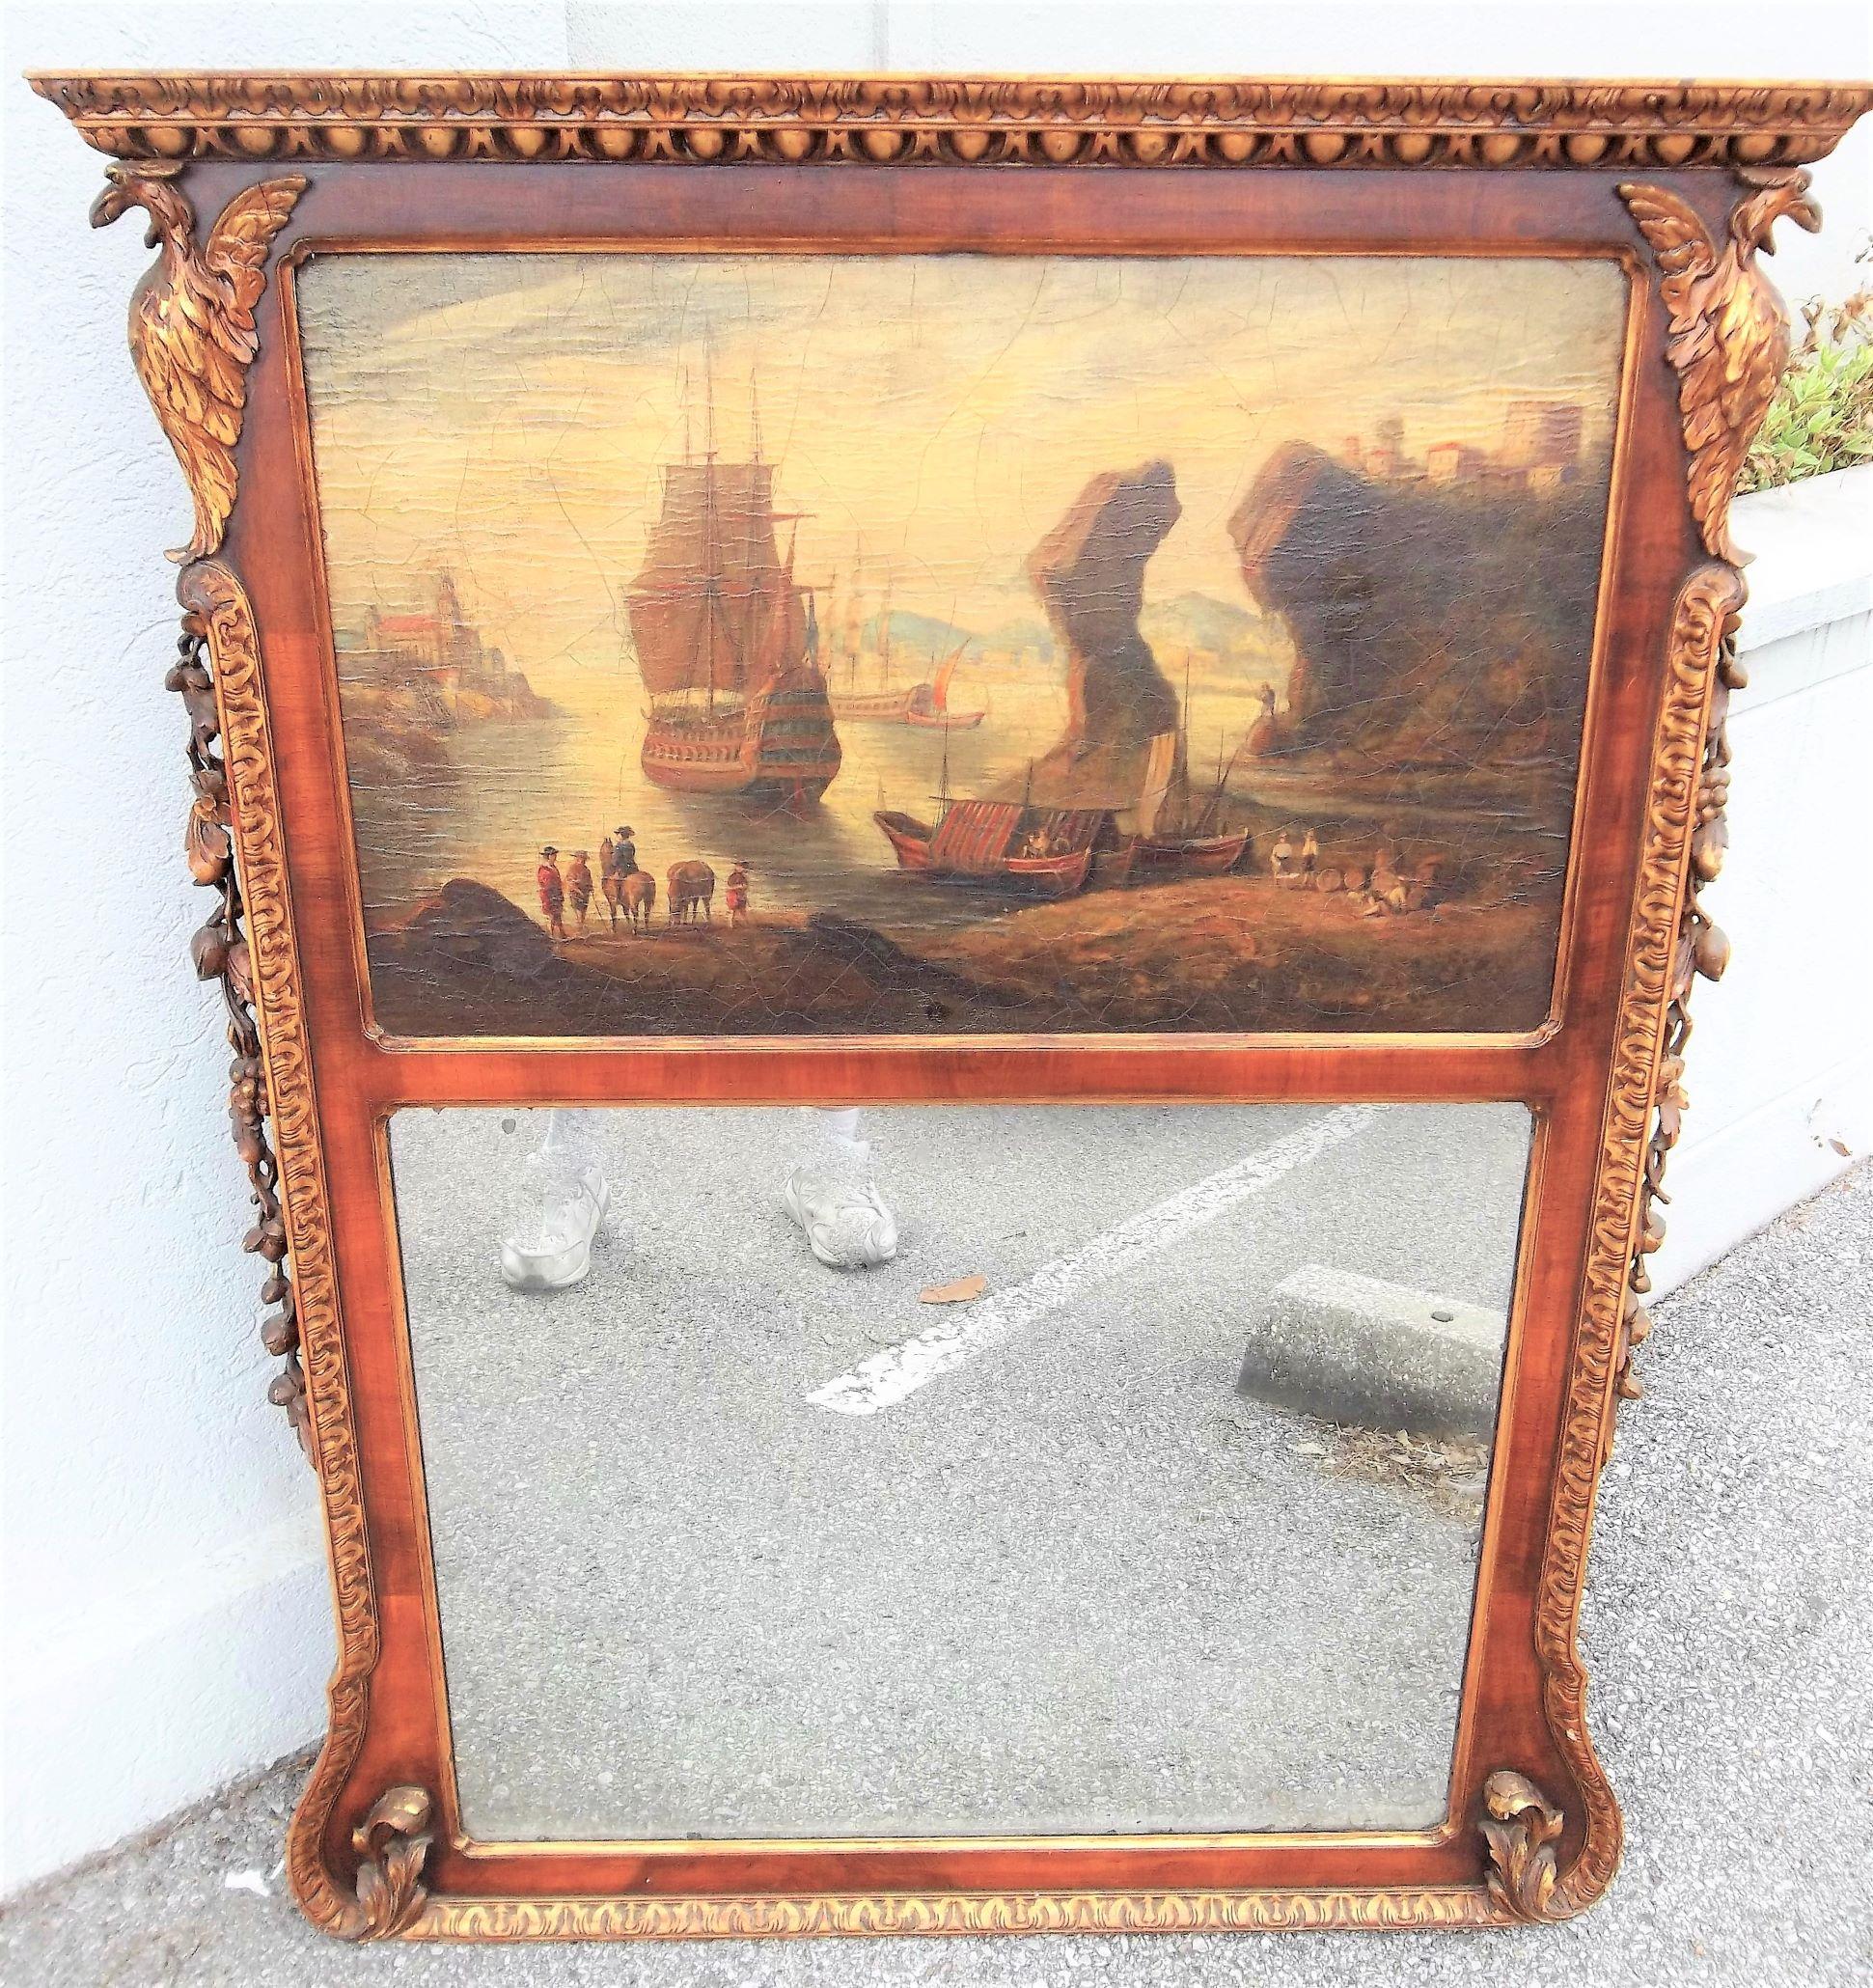 A seascape or landscape encased by walnut frame with carved giltwood decoration. The lower mirror plate showing signs of silver separation, spotting and diamond dust. Both plate and oil appear original, circa 1760. A very fine and somewhat rare